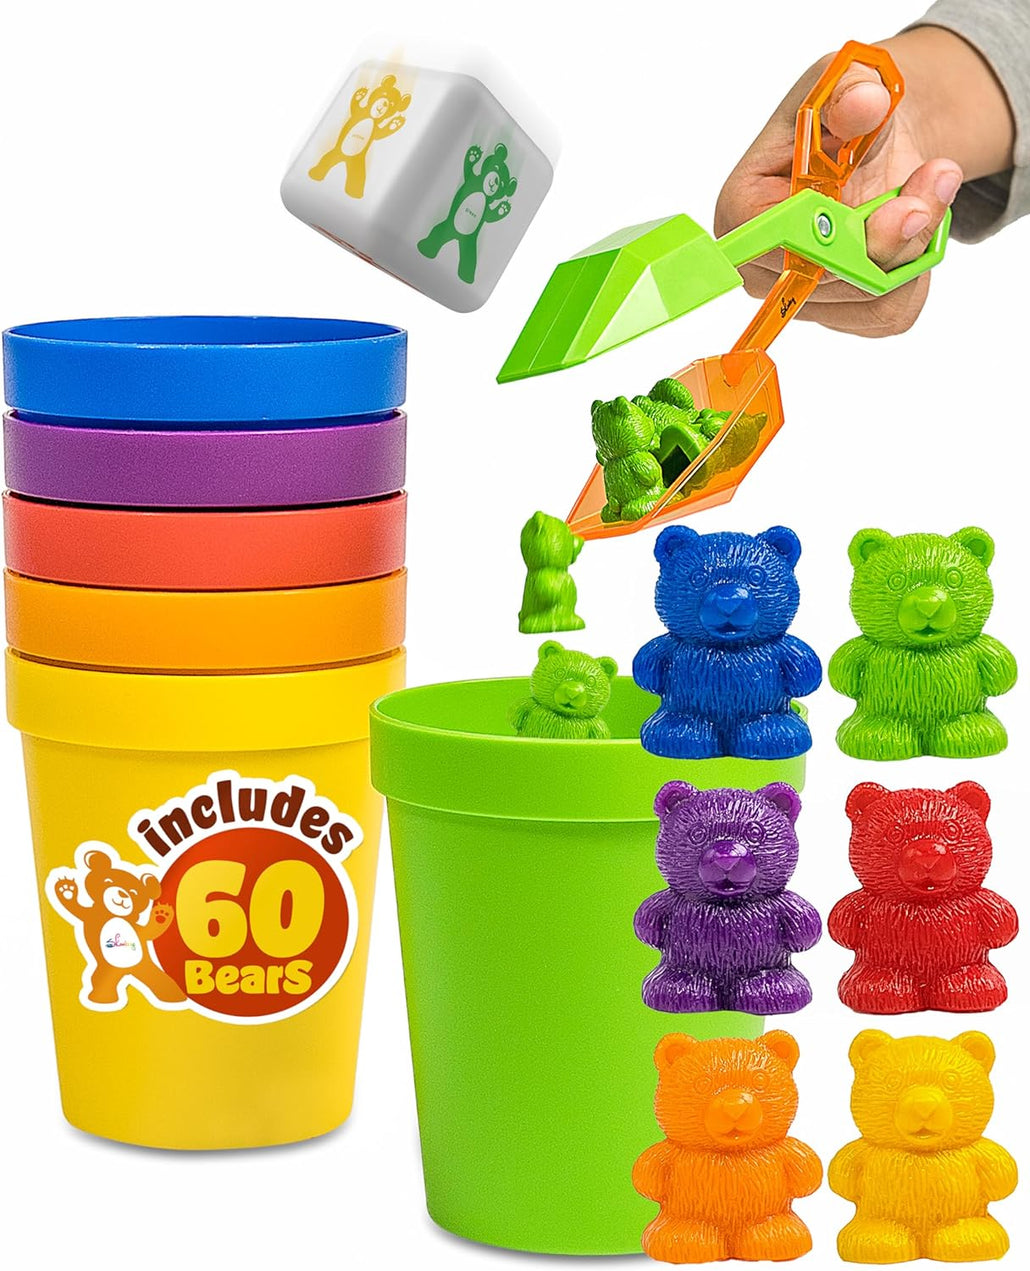 Skoolzy Rainbow Counting Bears with Matching Sorting Cups, Dice, Tongs. 70pc<p><font><small><b>SK-016</b></small>